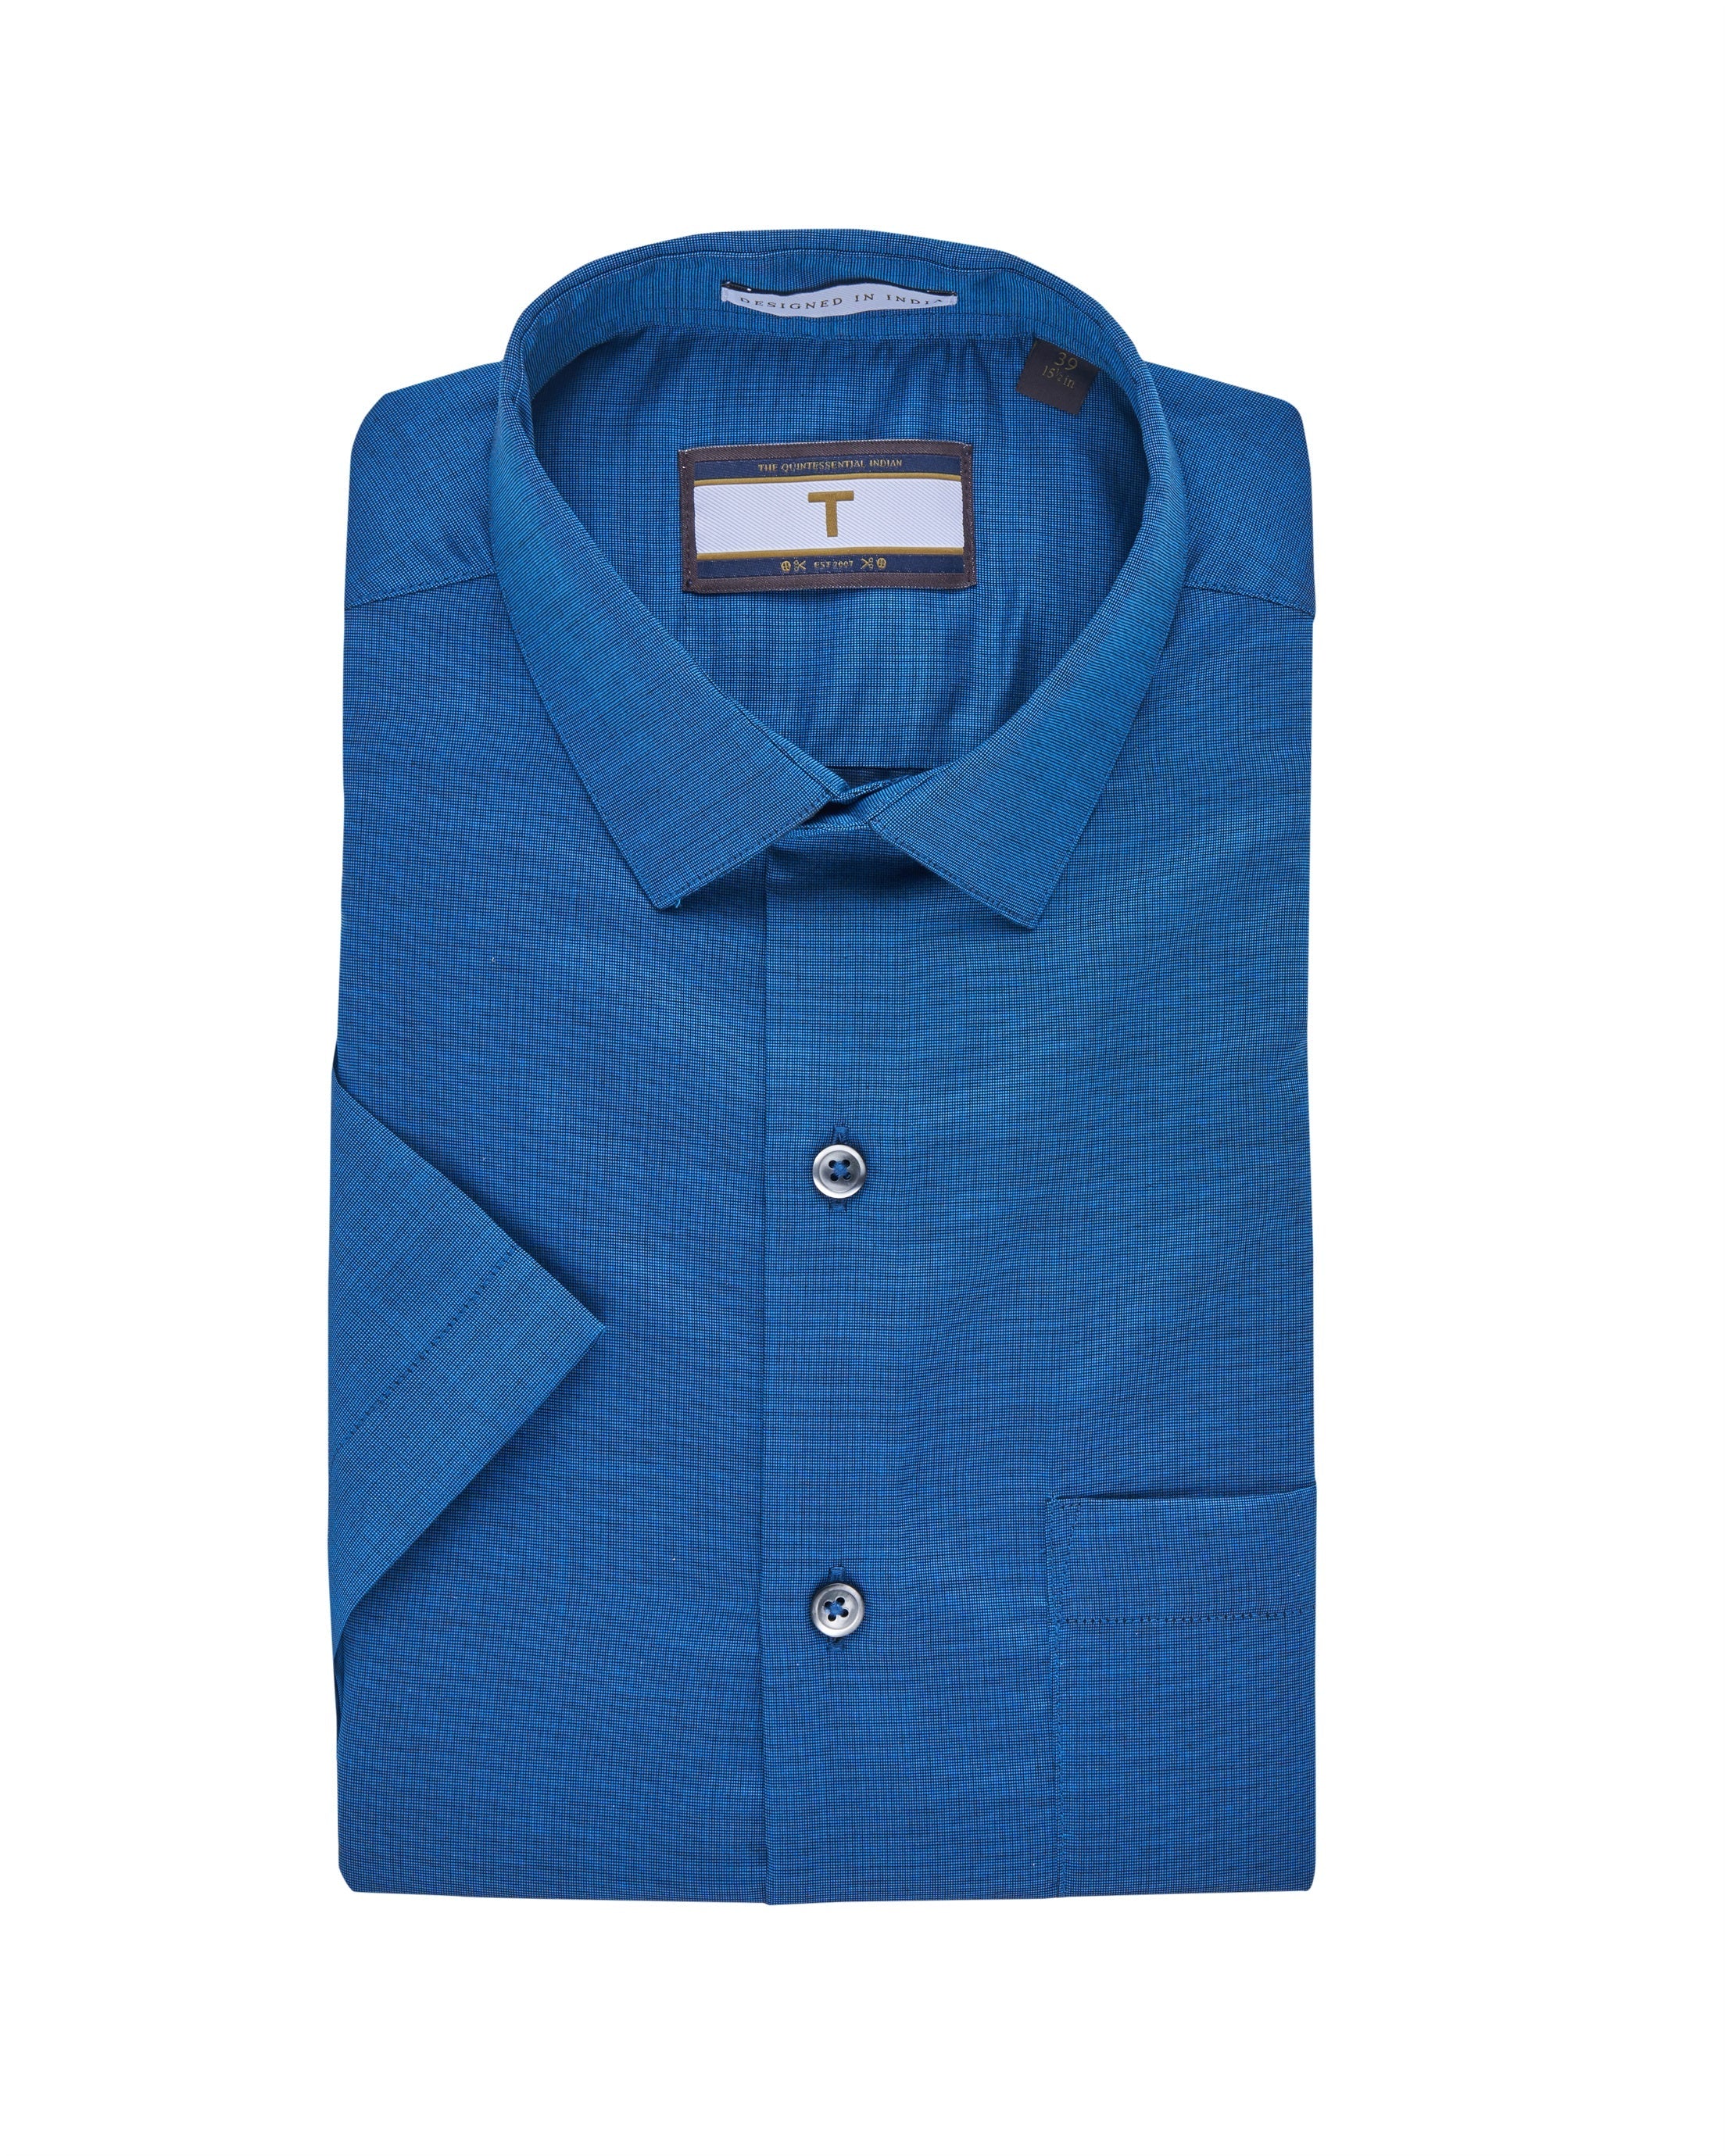 T the brand Pick & Pick Cotton Slim Fit Half Sleeved Shirt - Teal Blue